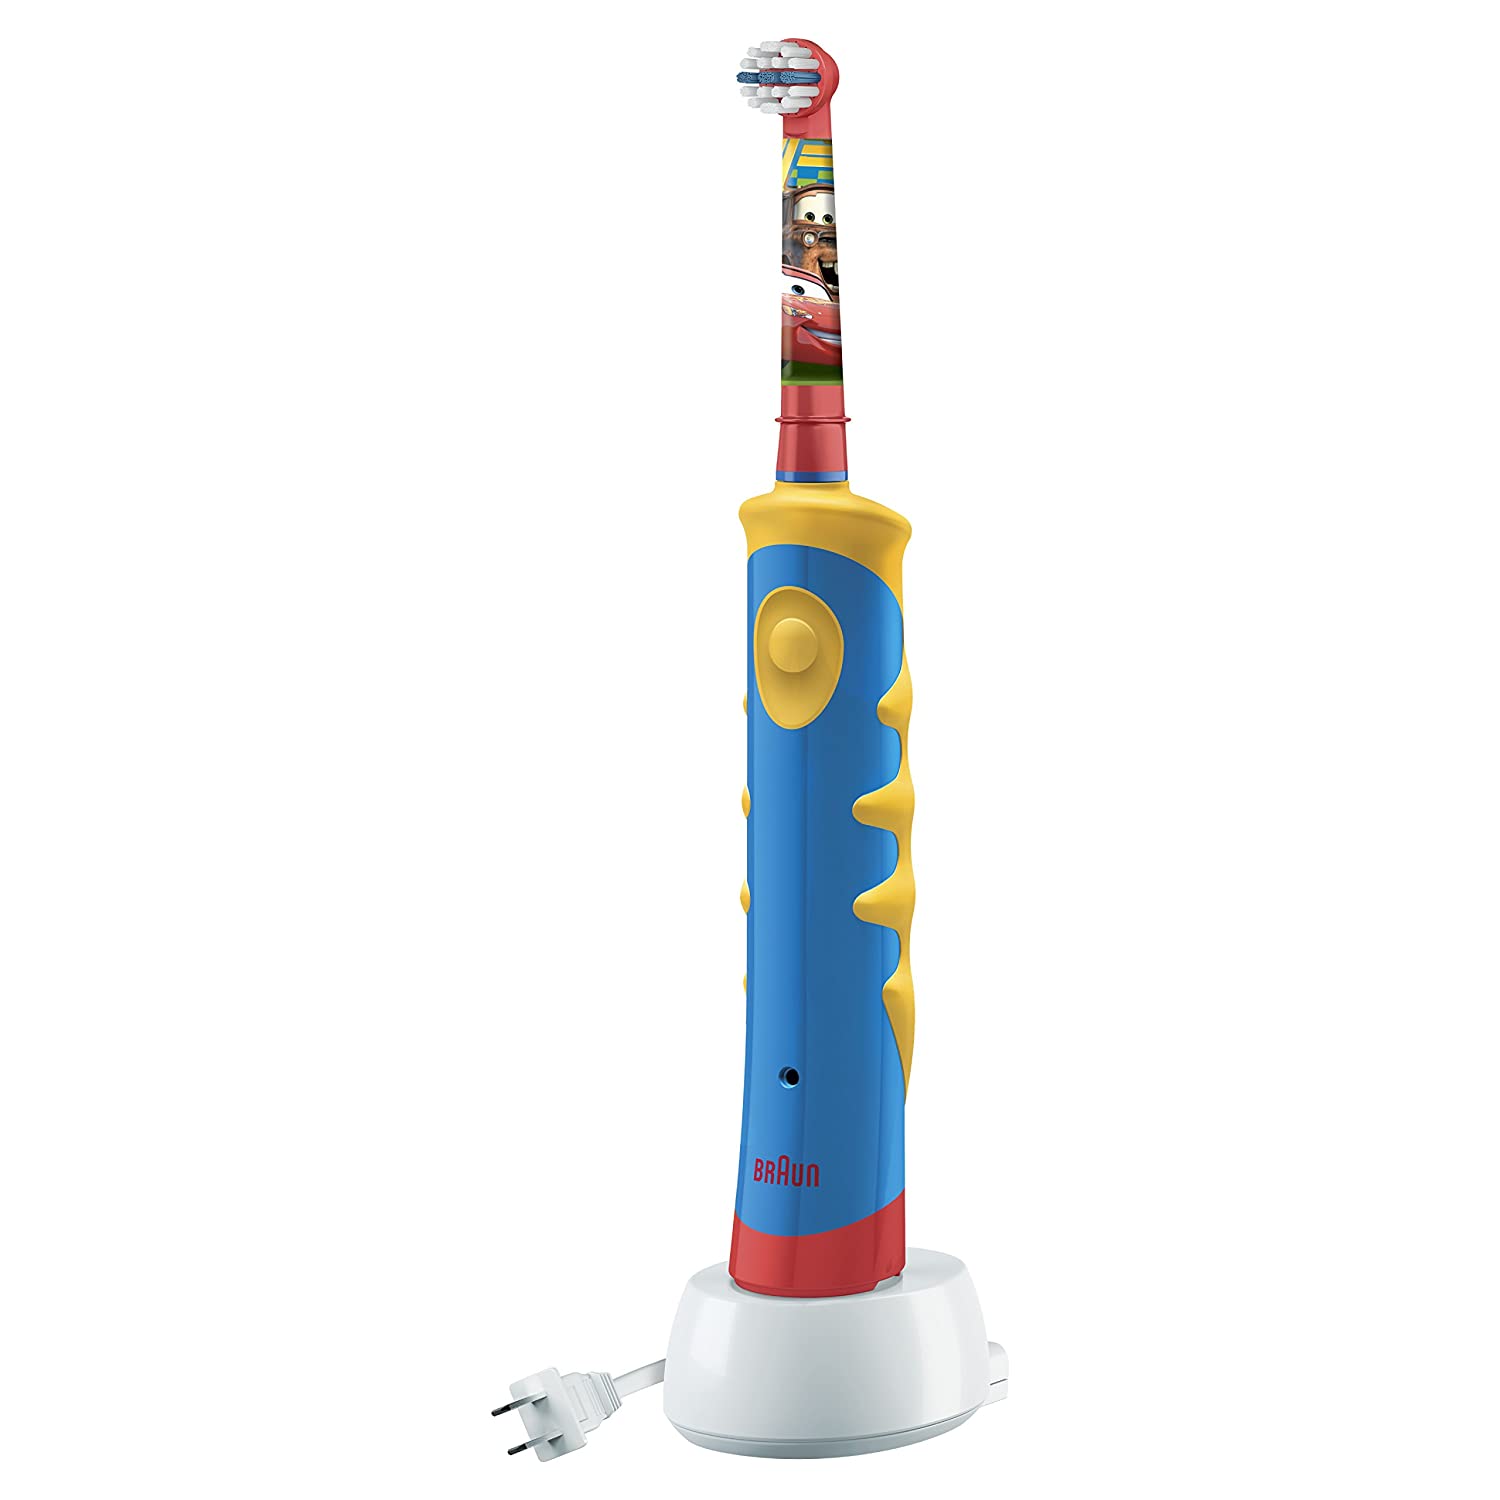 Oral-B Kid's Rechargeable Electric Toothbrush featuring Disney & Pixar's Cars